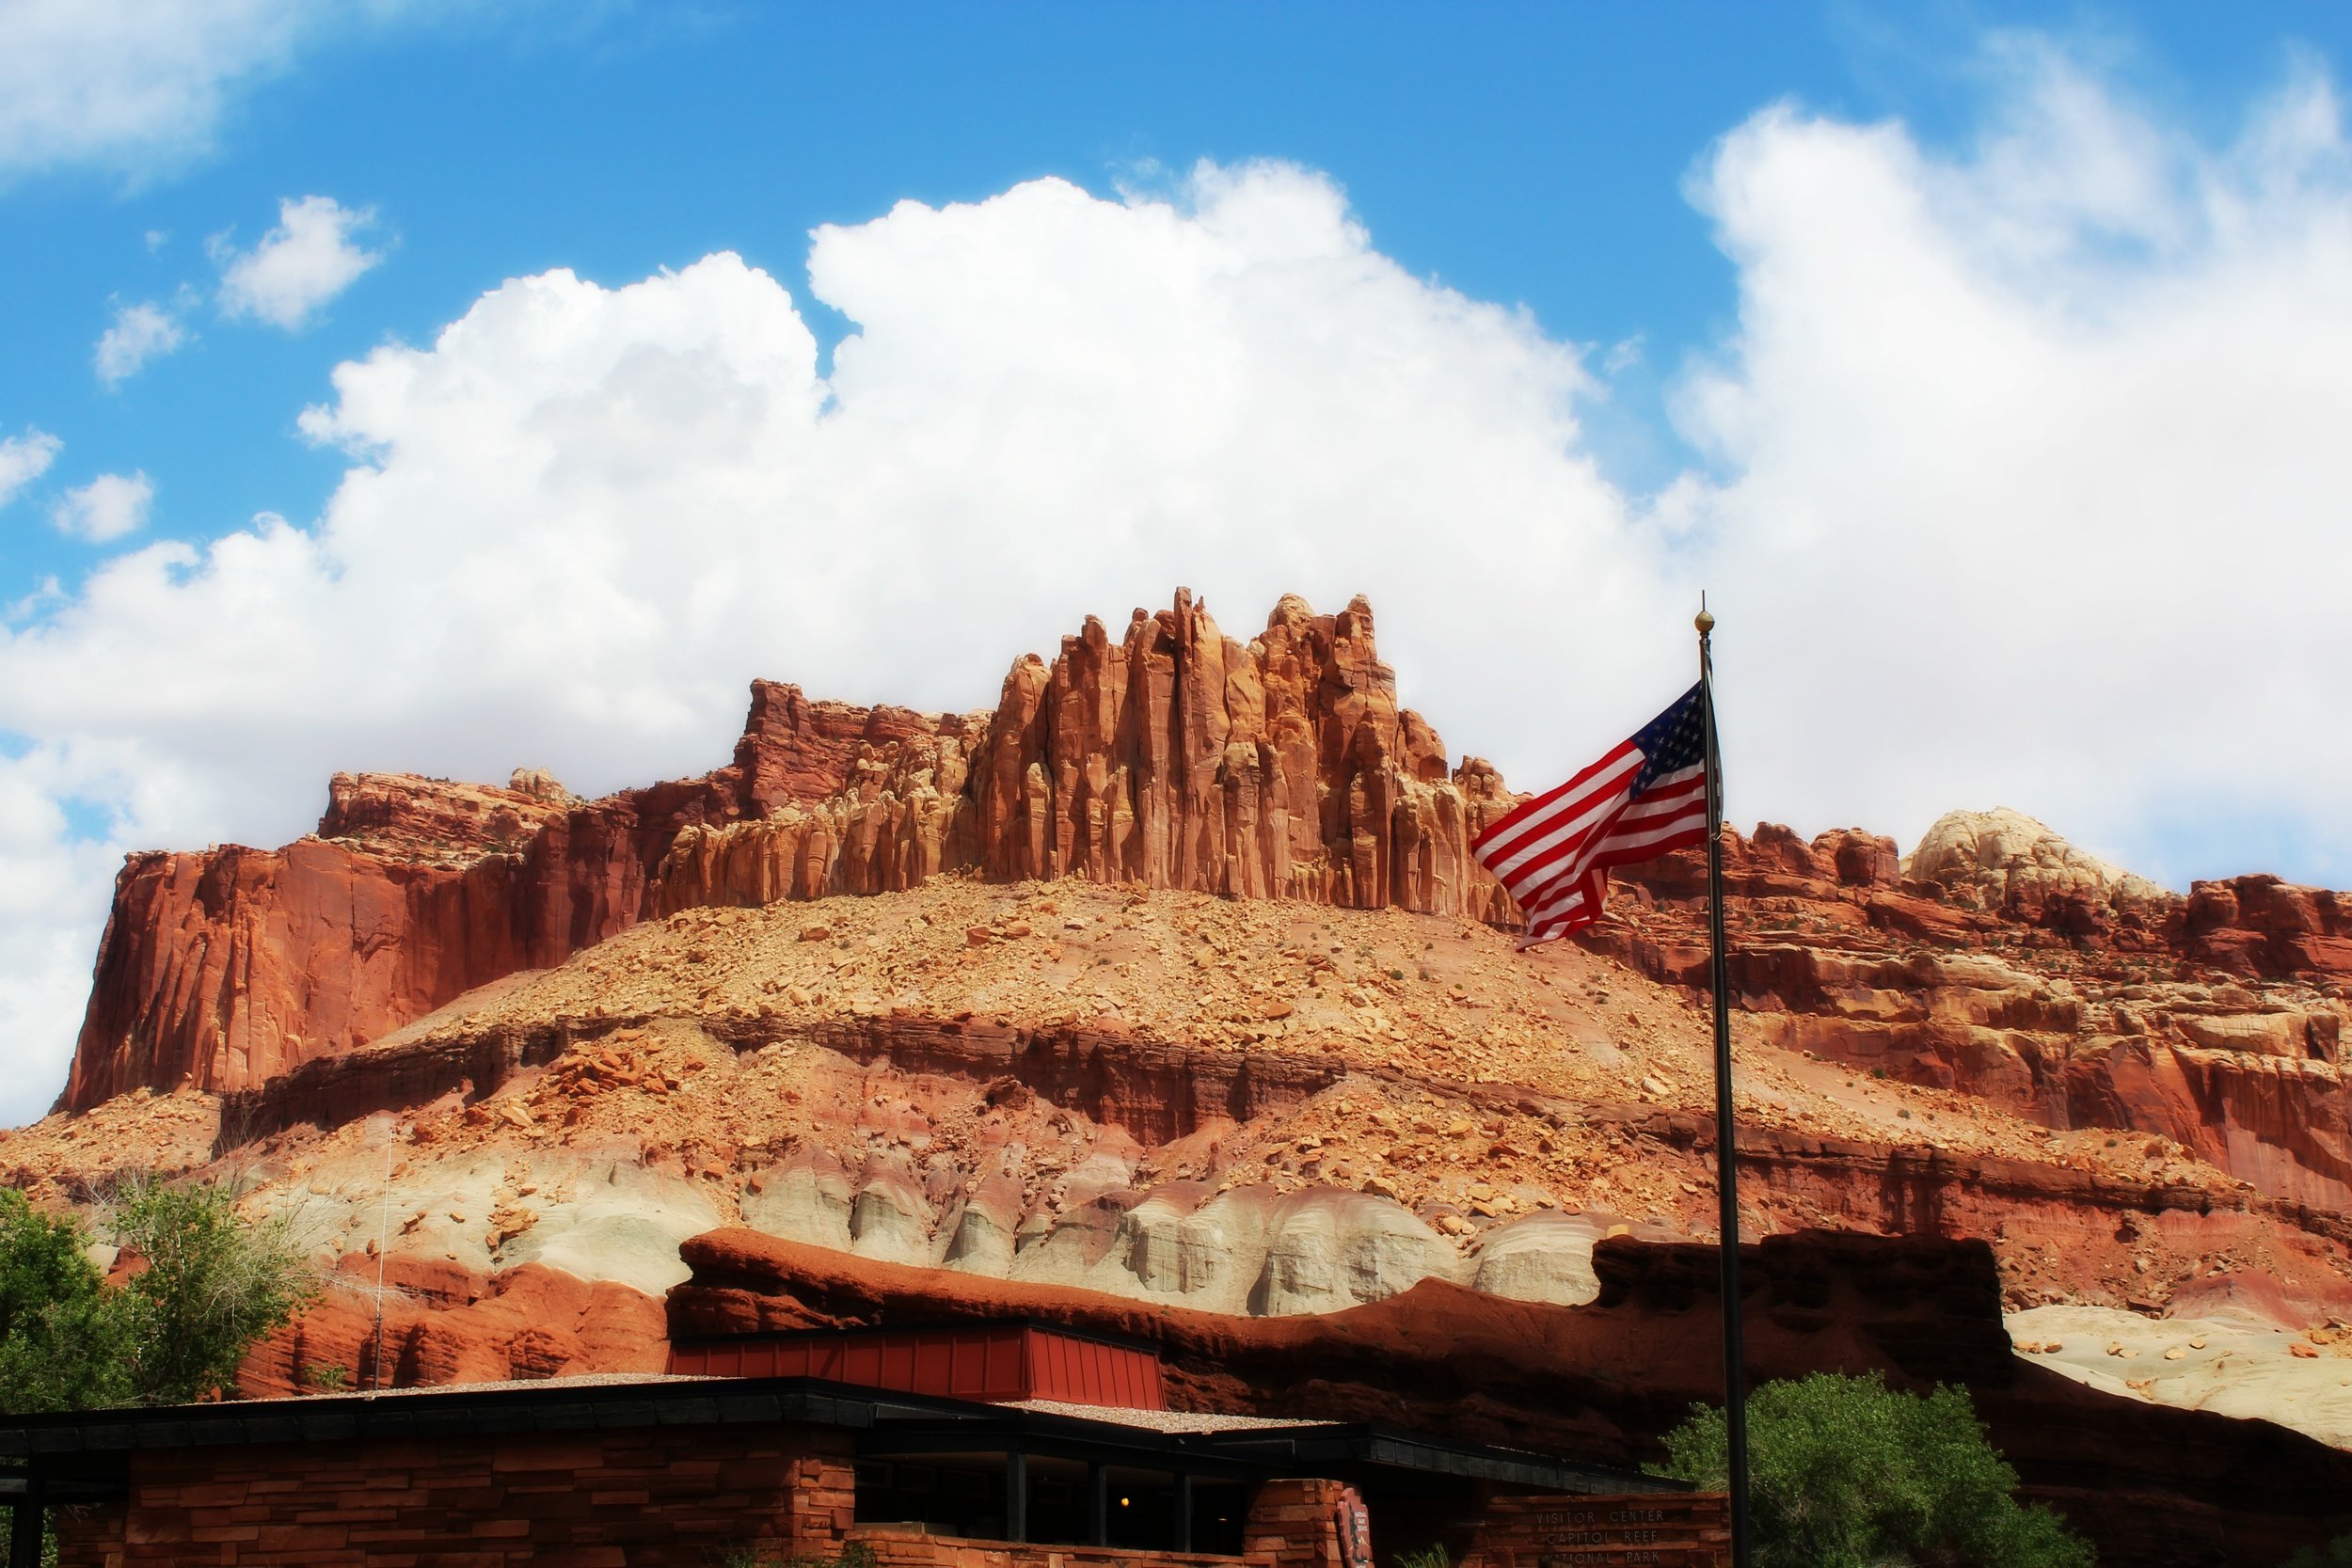 capitol-reef-visitor-center